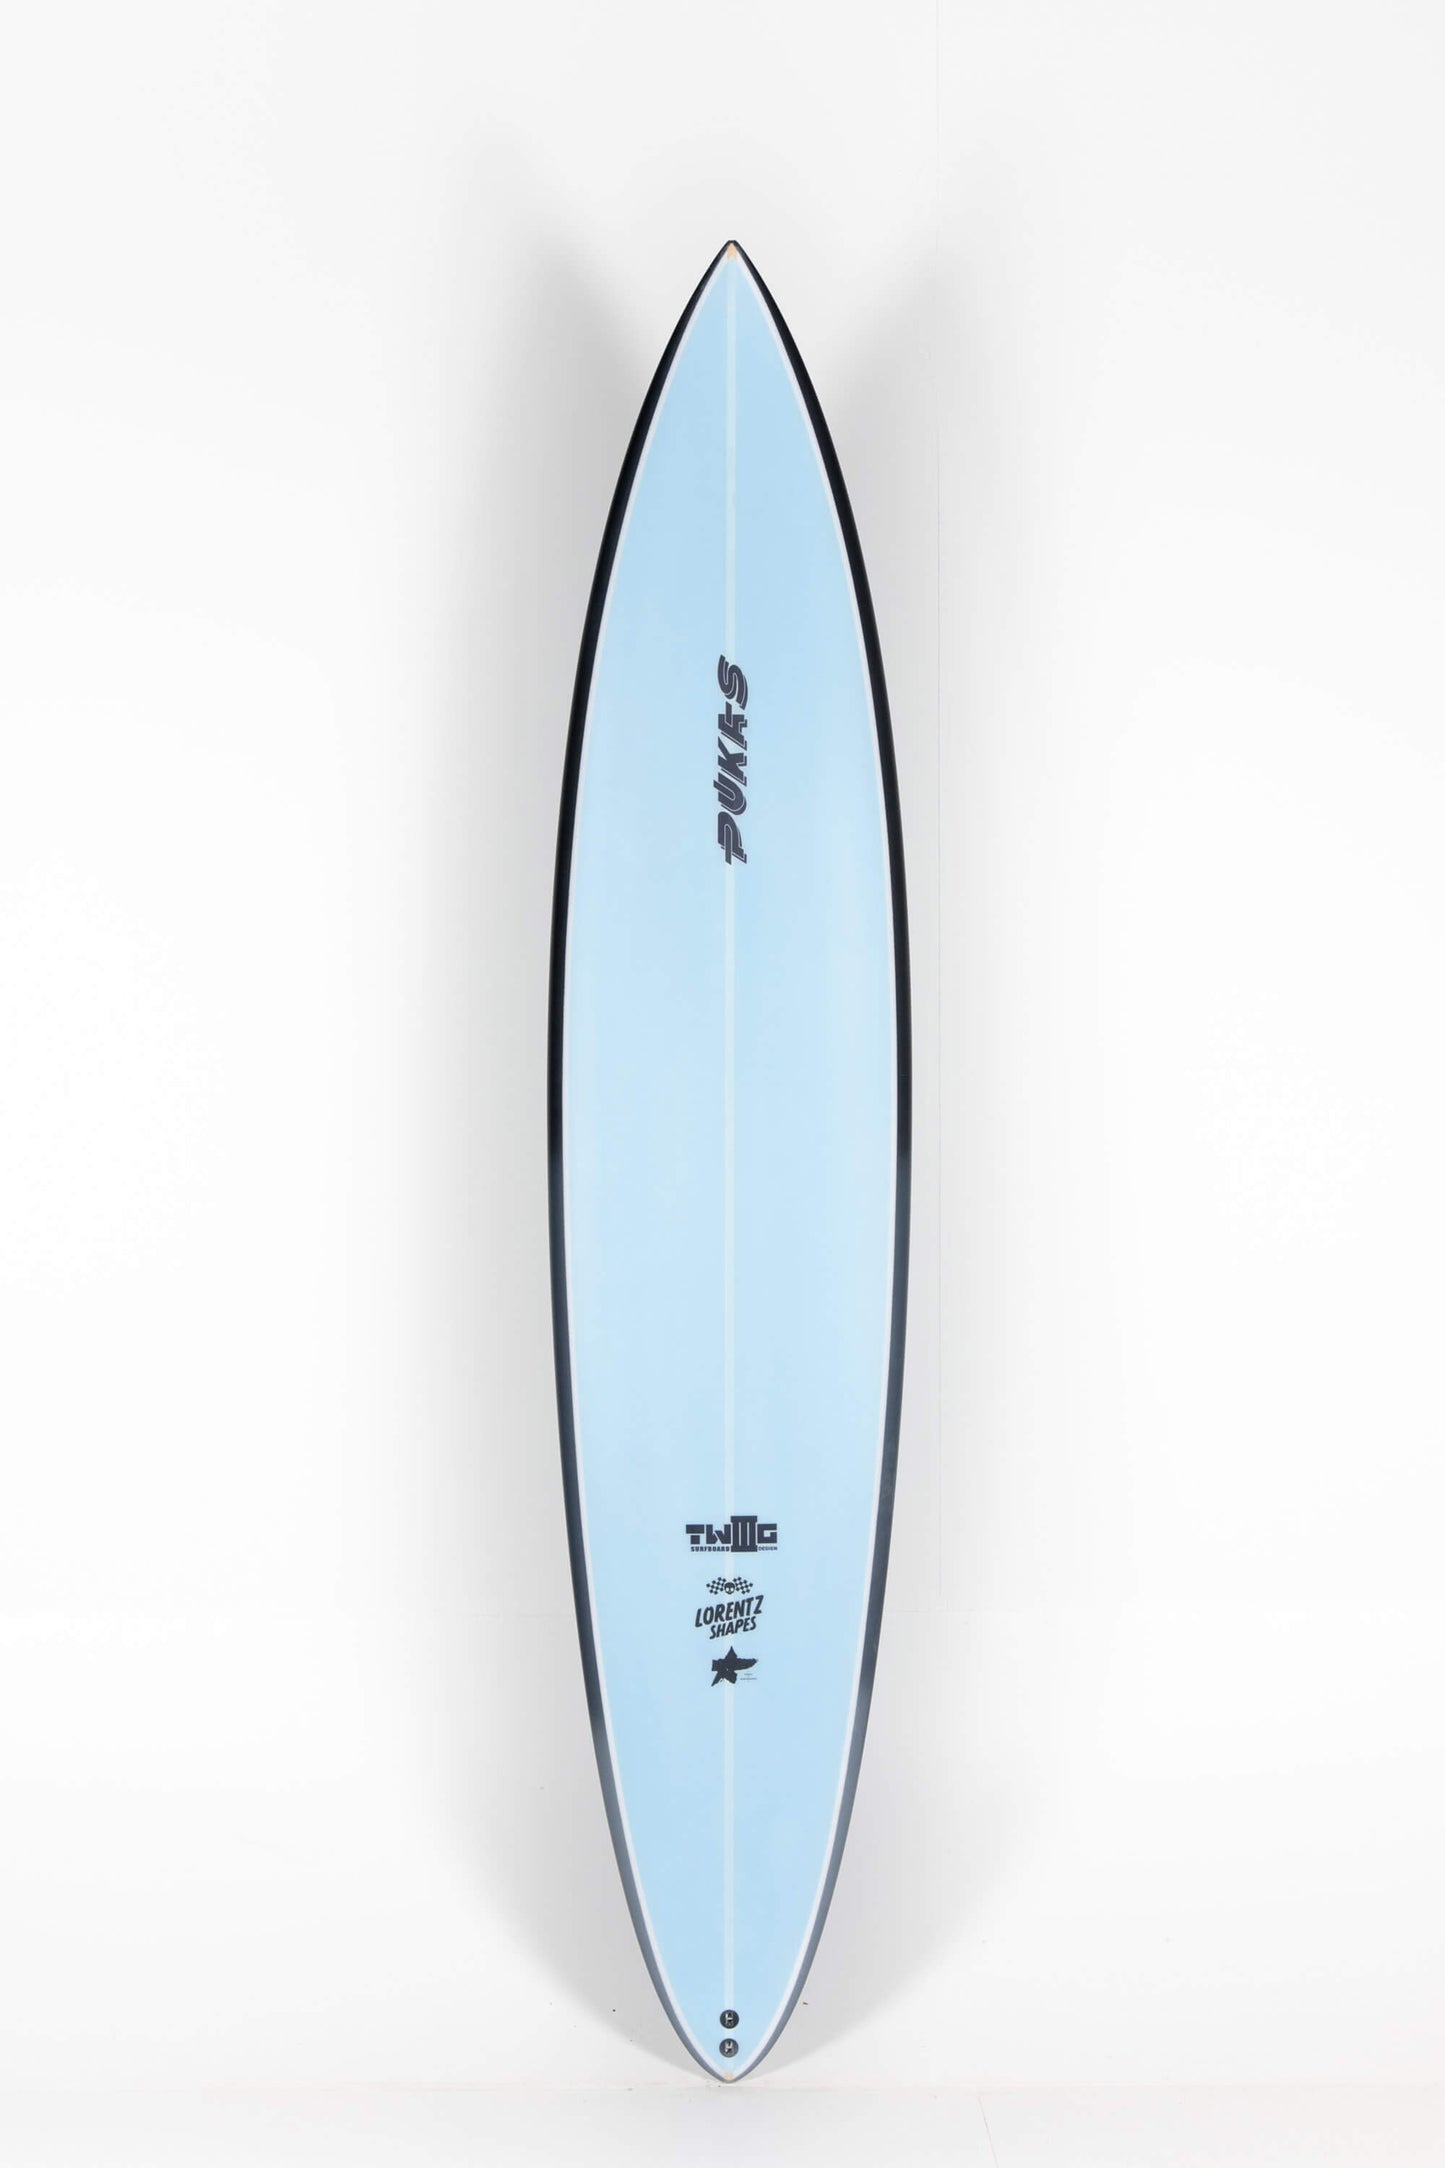 Pukas Surf Shop - Pukas Surfboard - TWIG CHARGER by Axel Lorentz - 8´6” x 20 5/8 x 3 3/8 - 60L  AX04825